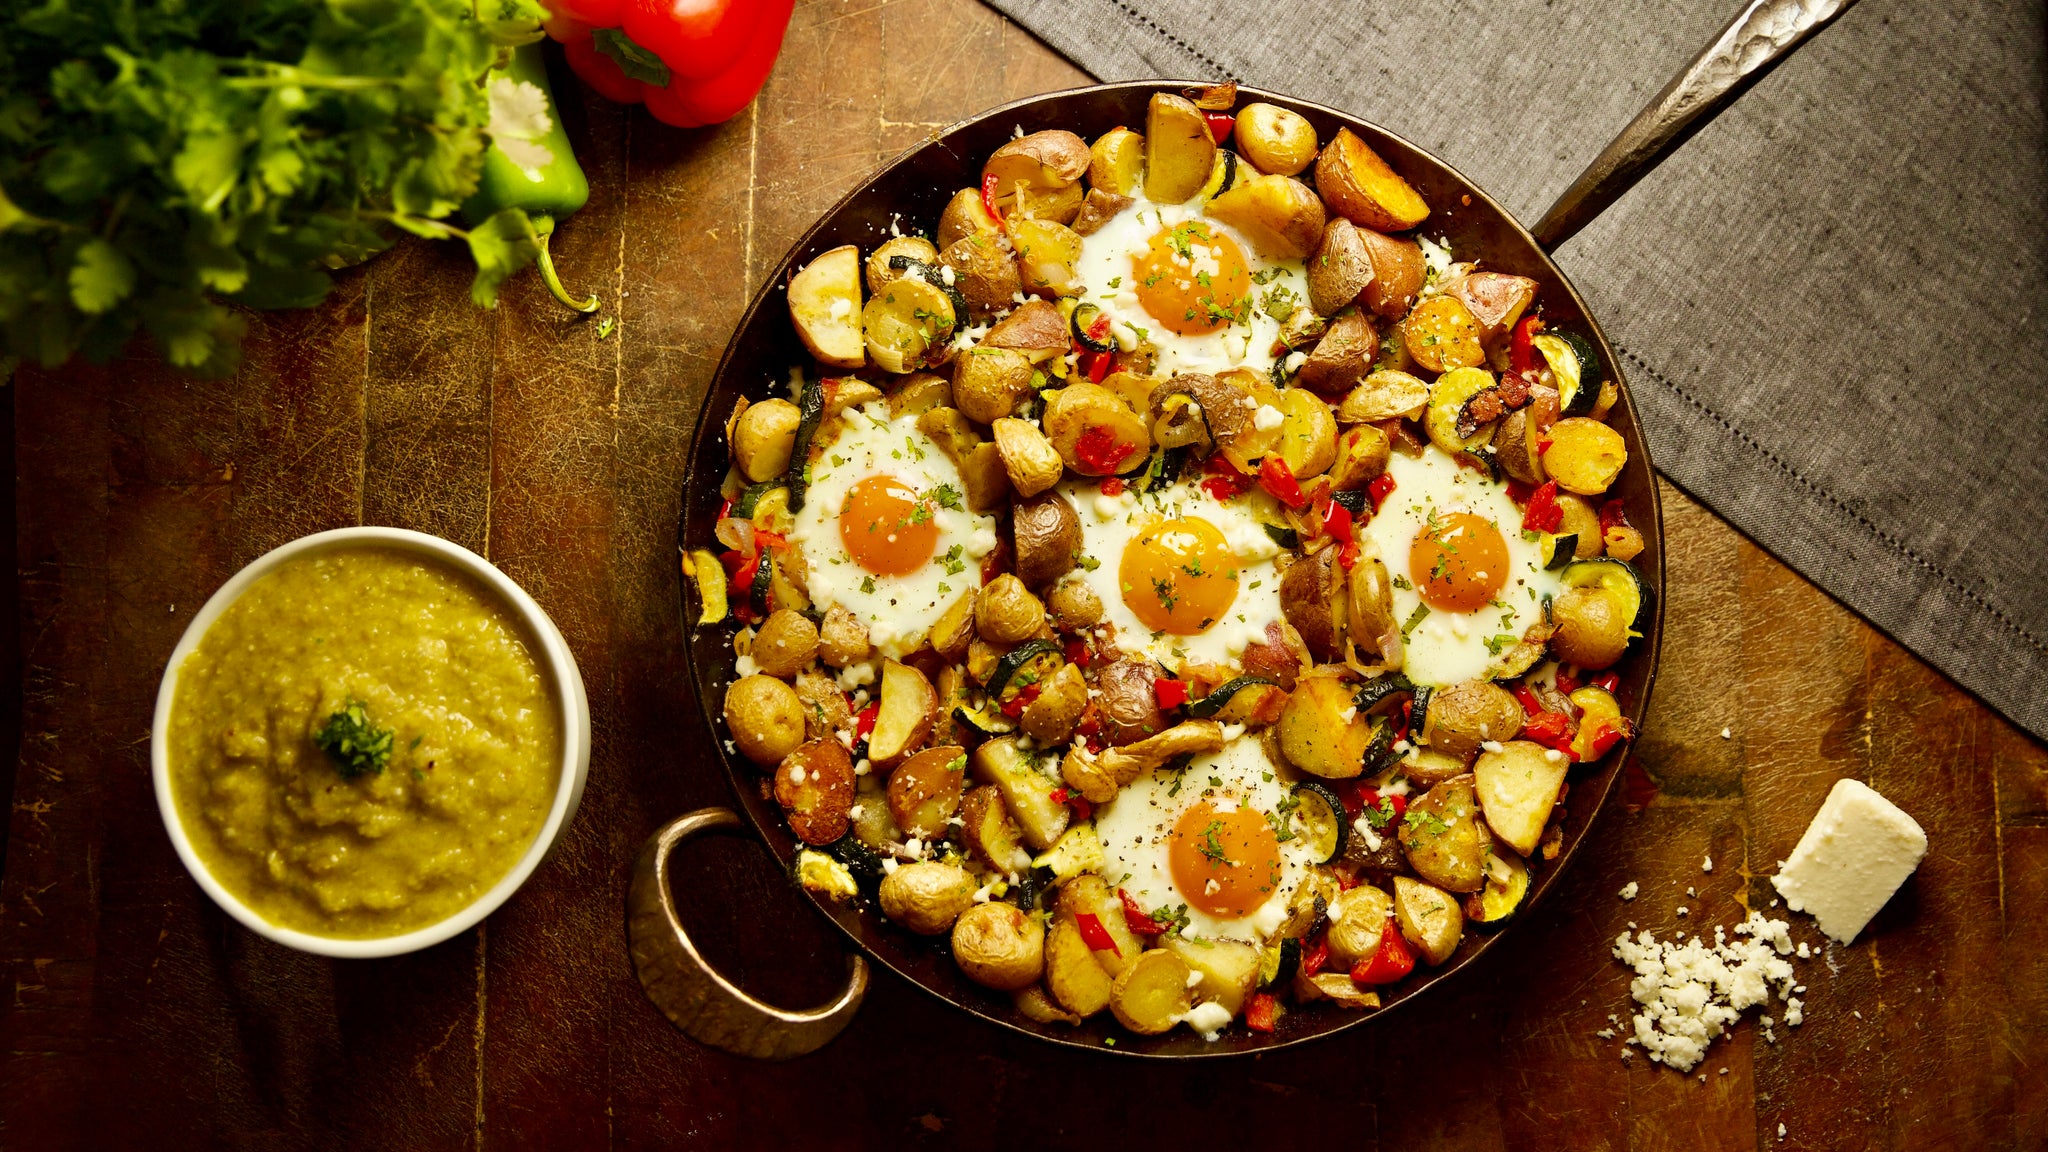 Rustic Baked Eggs with Roasted Vegetables and Tomatillo Salsa